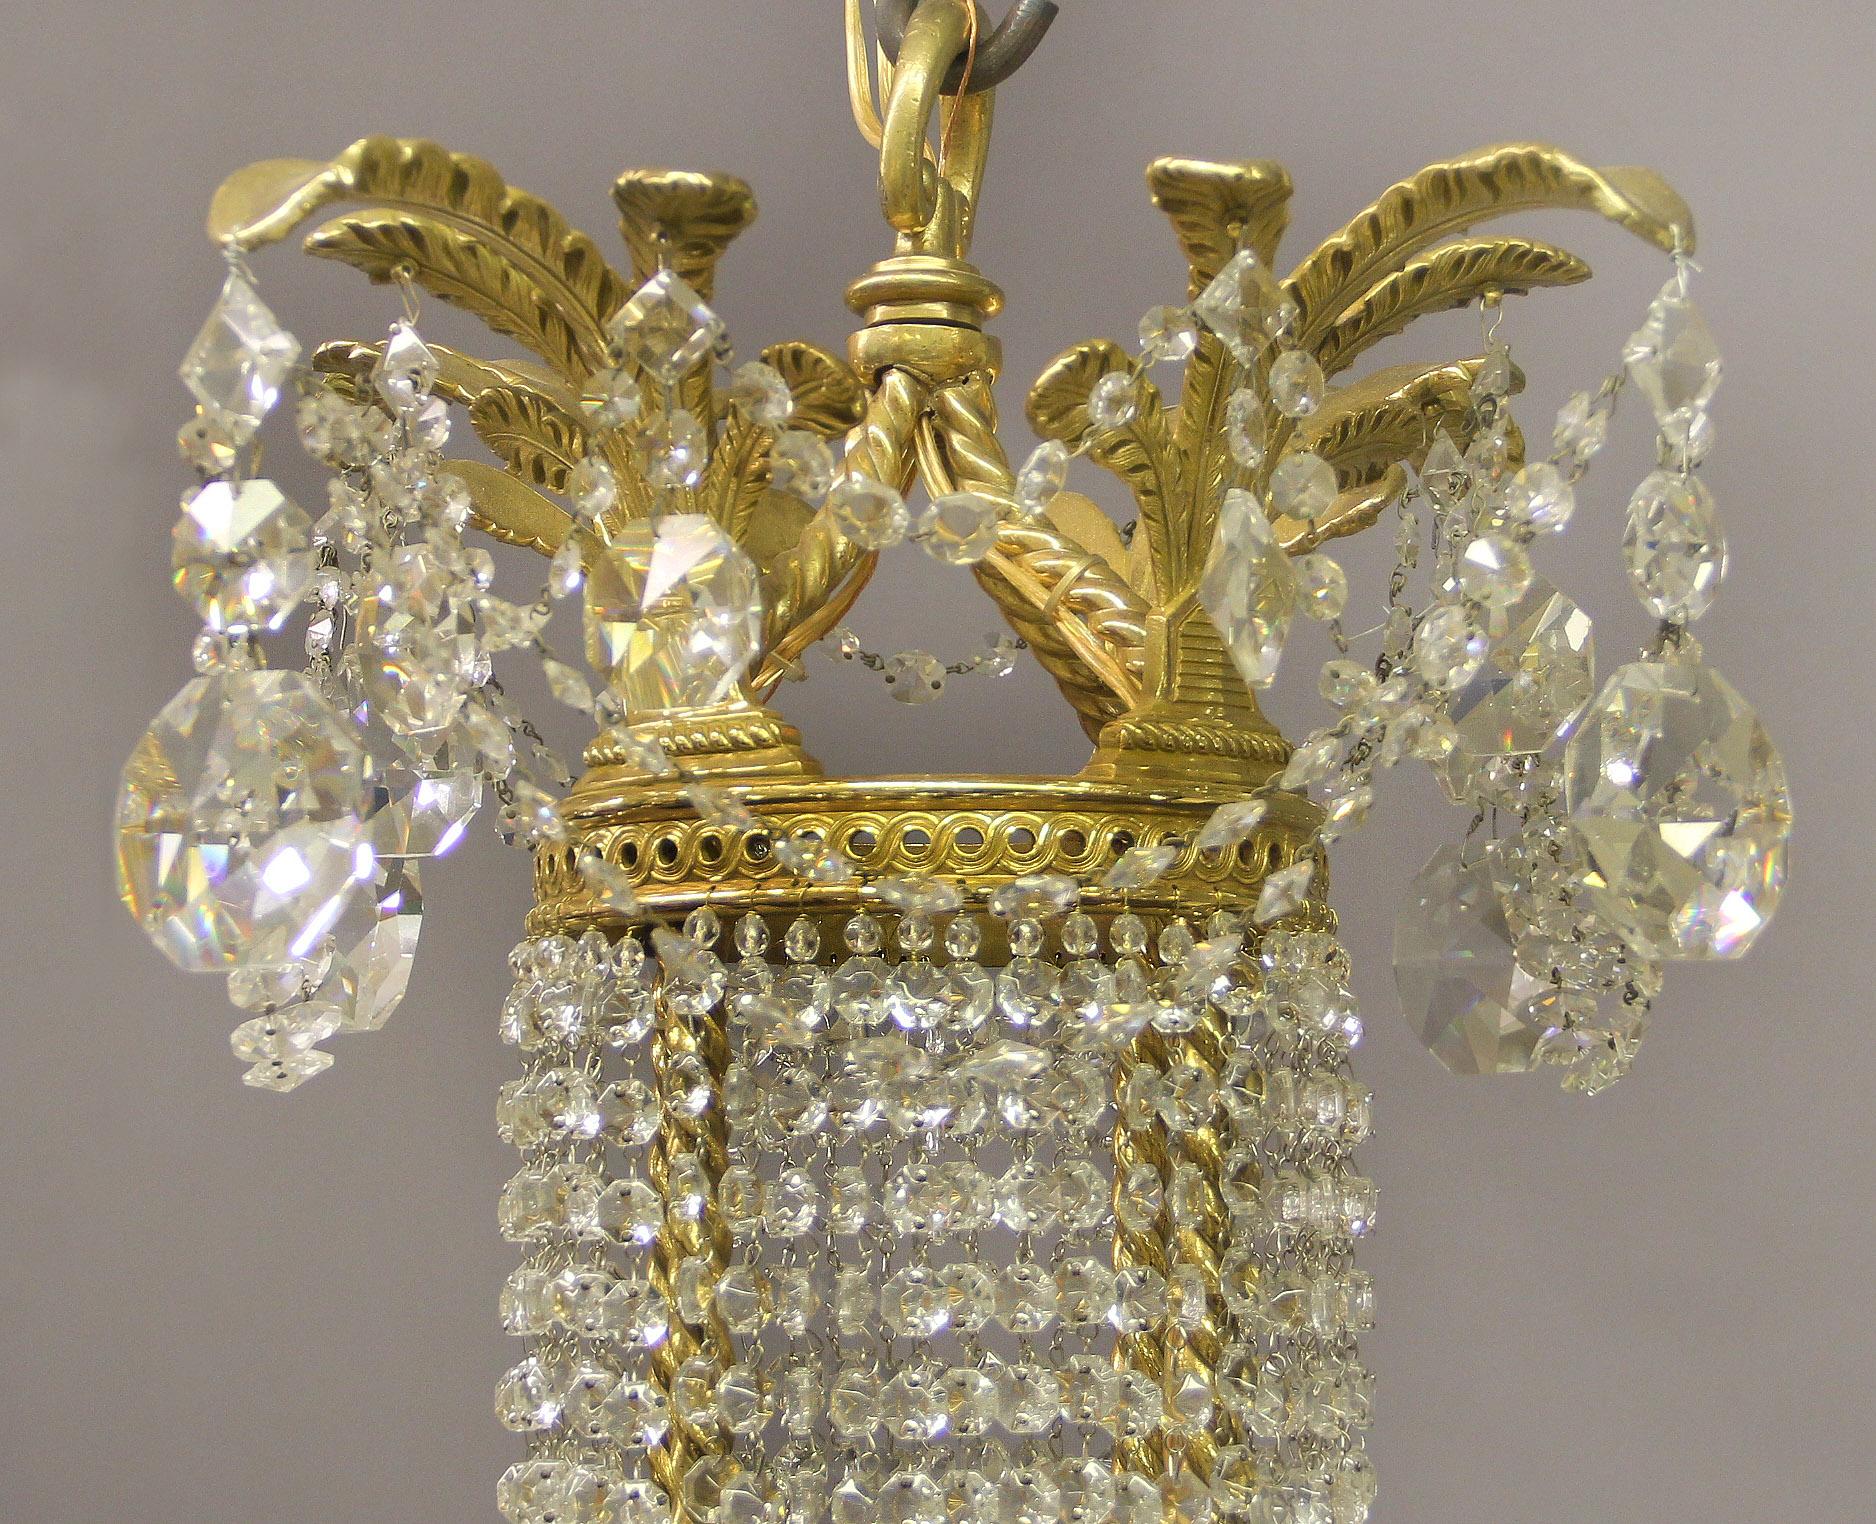 French Exquisite Late 19th Century Gilt Bronze and Crystal Chandelier by Baccarat For Sale